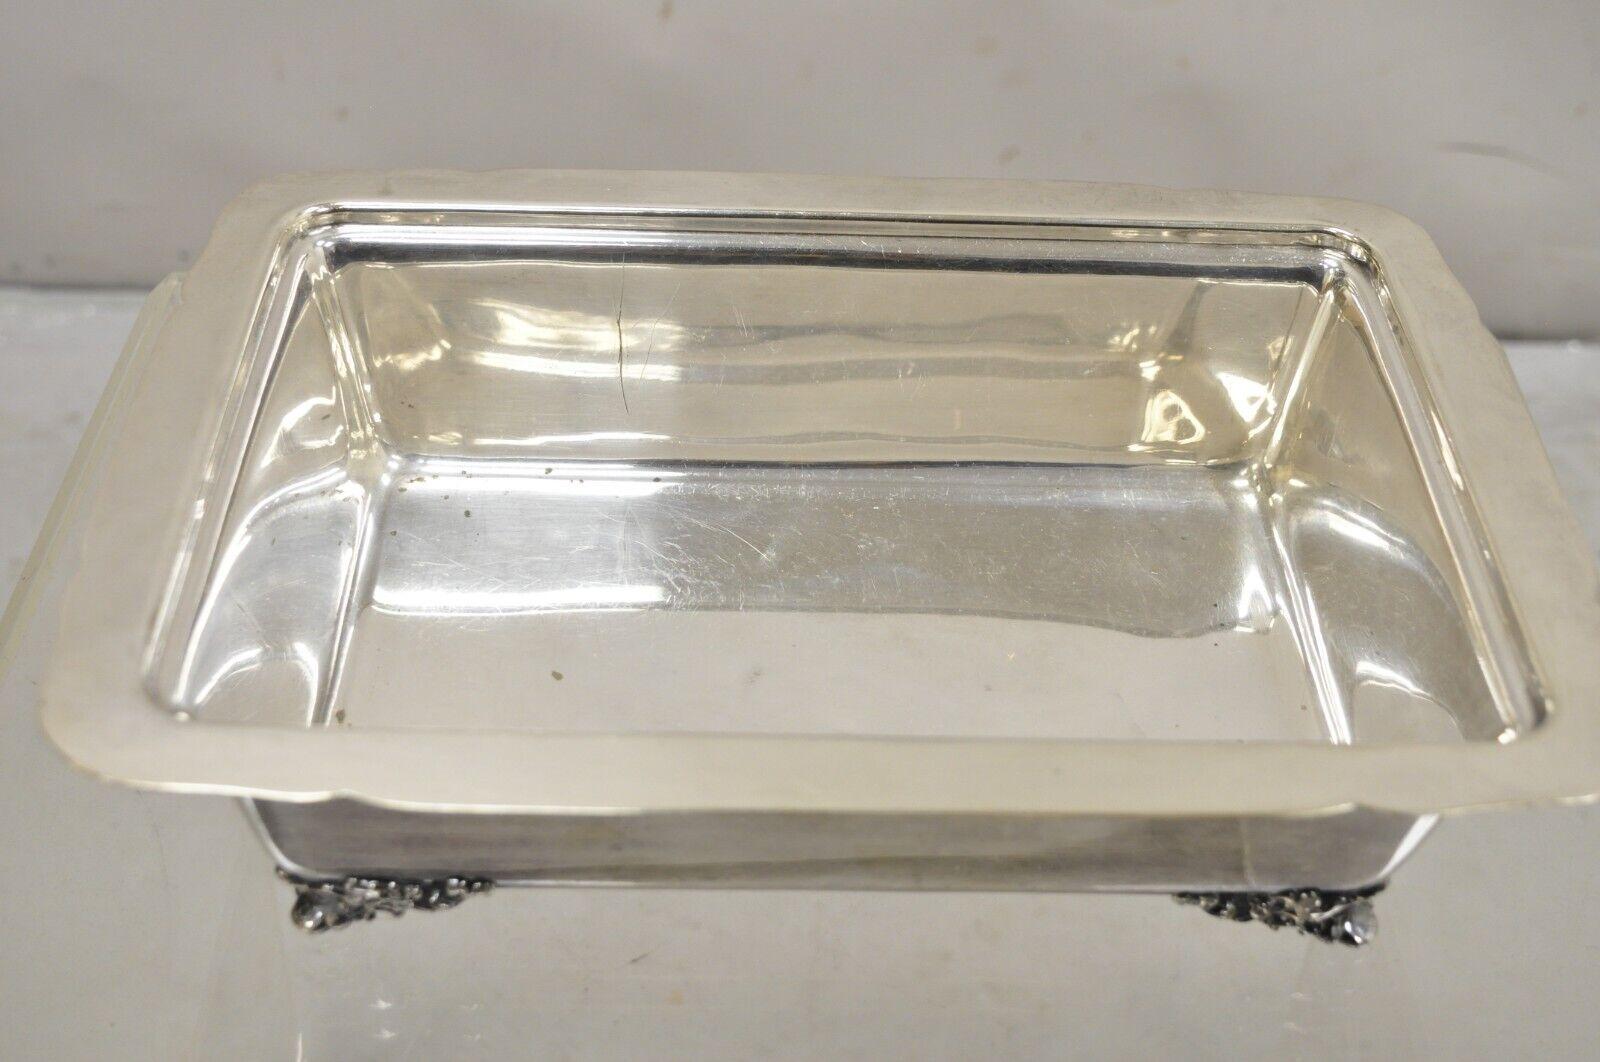 Vintage Reed & Barton Mayflower 5006 Silver Plated Covered Casserole Serving Dis For Sale 3